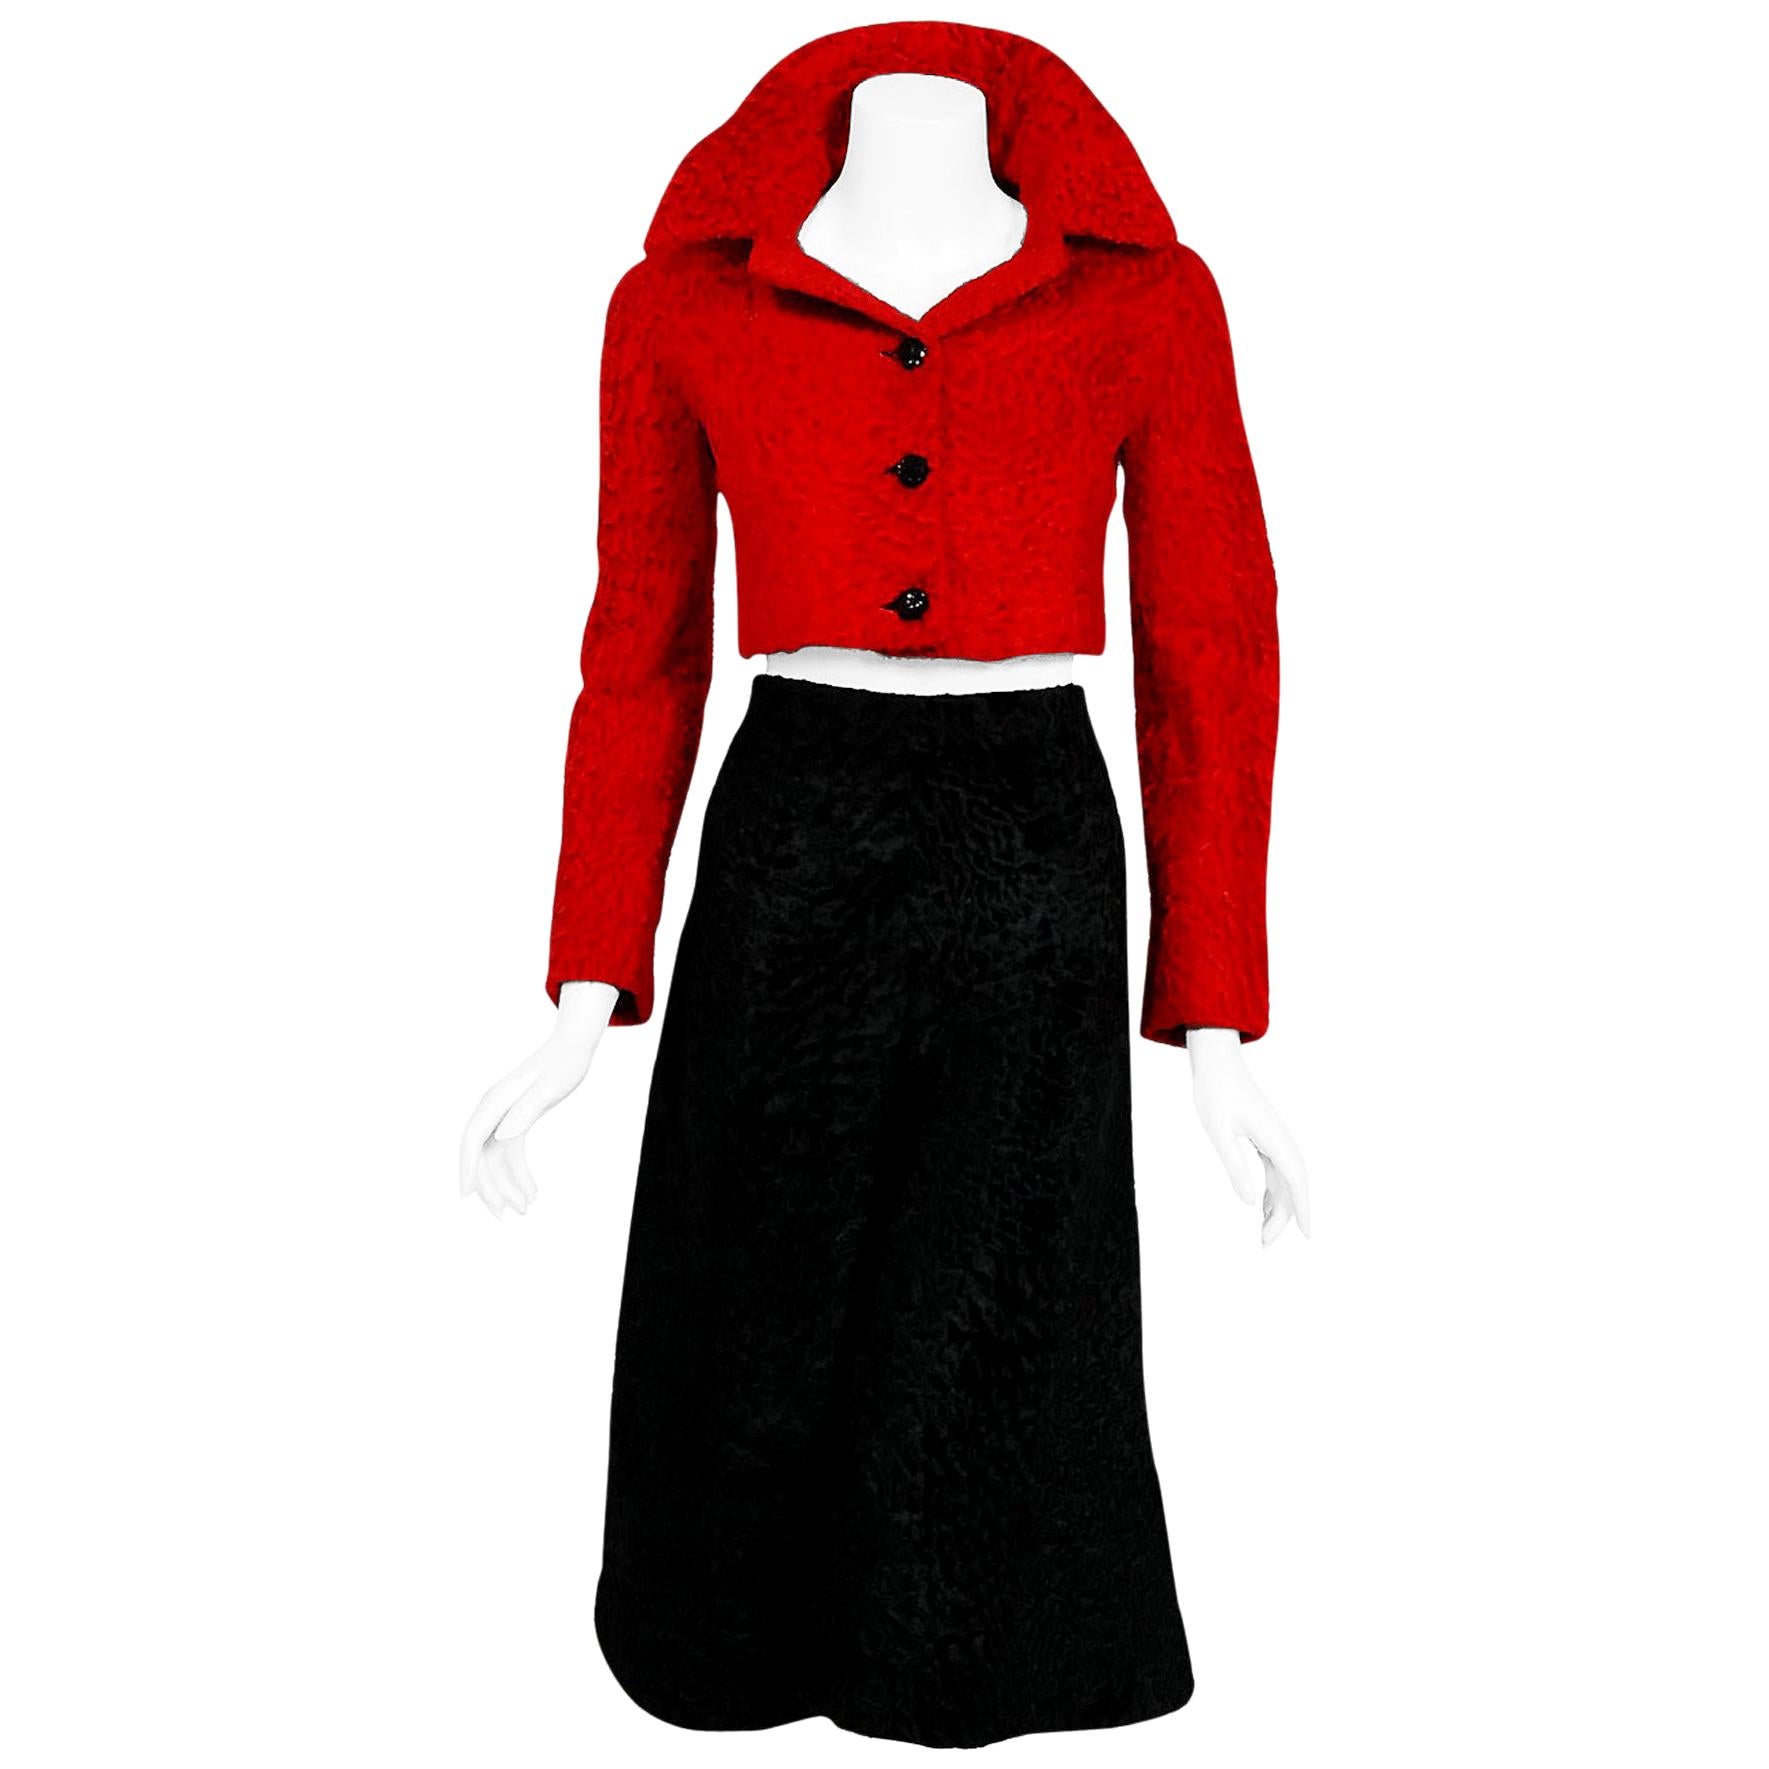 Vintage 1960s Christian Dior Couture Red Black Broadtail Jacket and Gaucho Pants